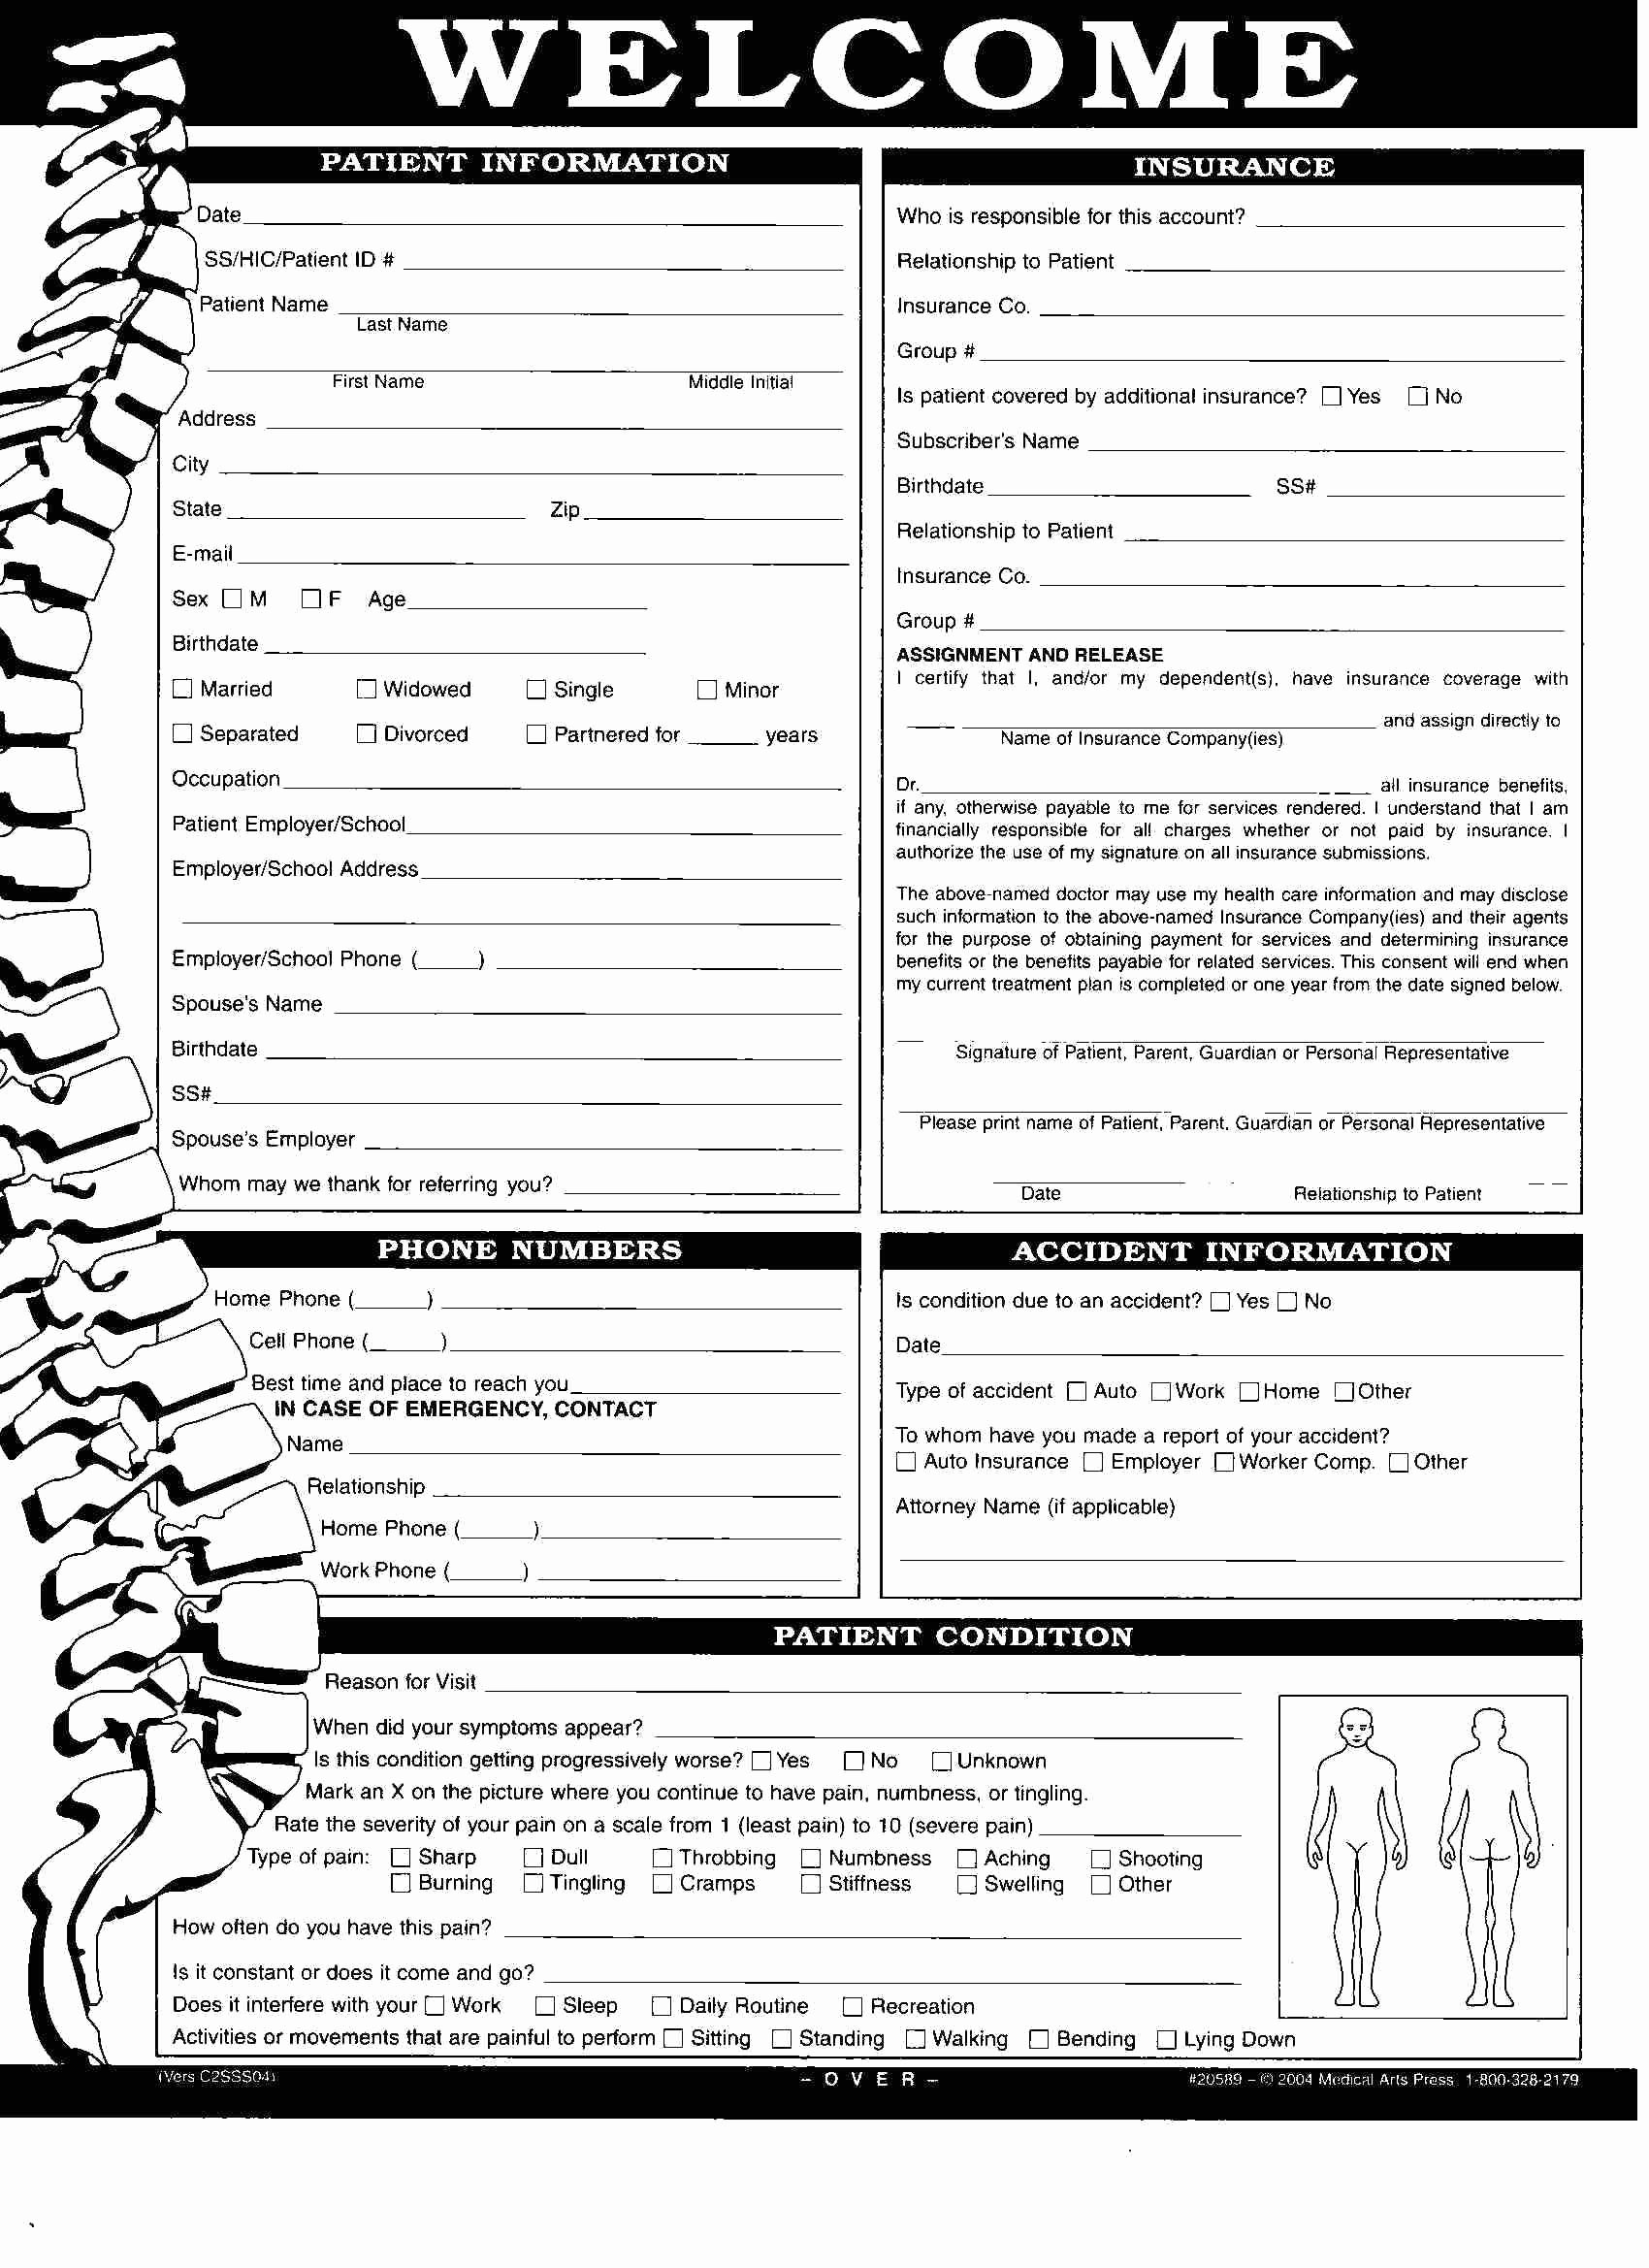 Patient Intake form Template New Patient Intake form Intake form 3 Client Intake form